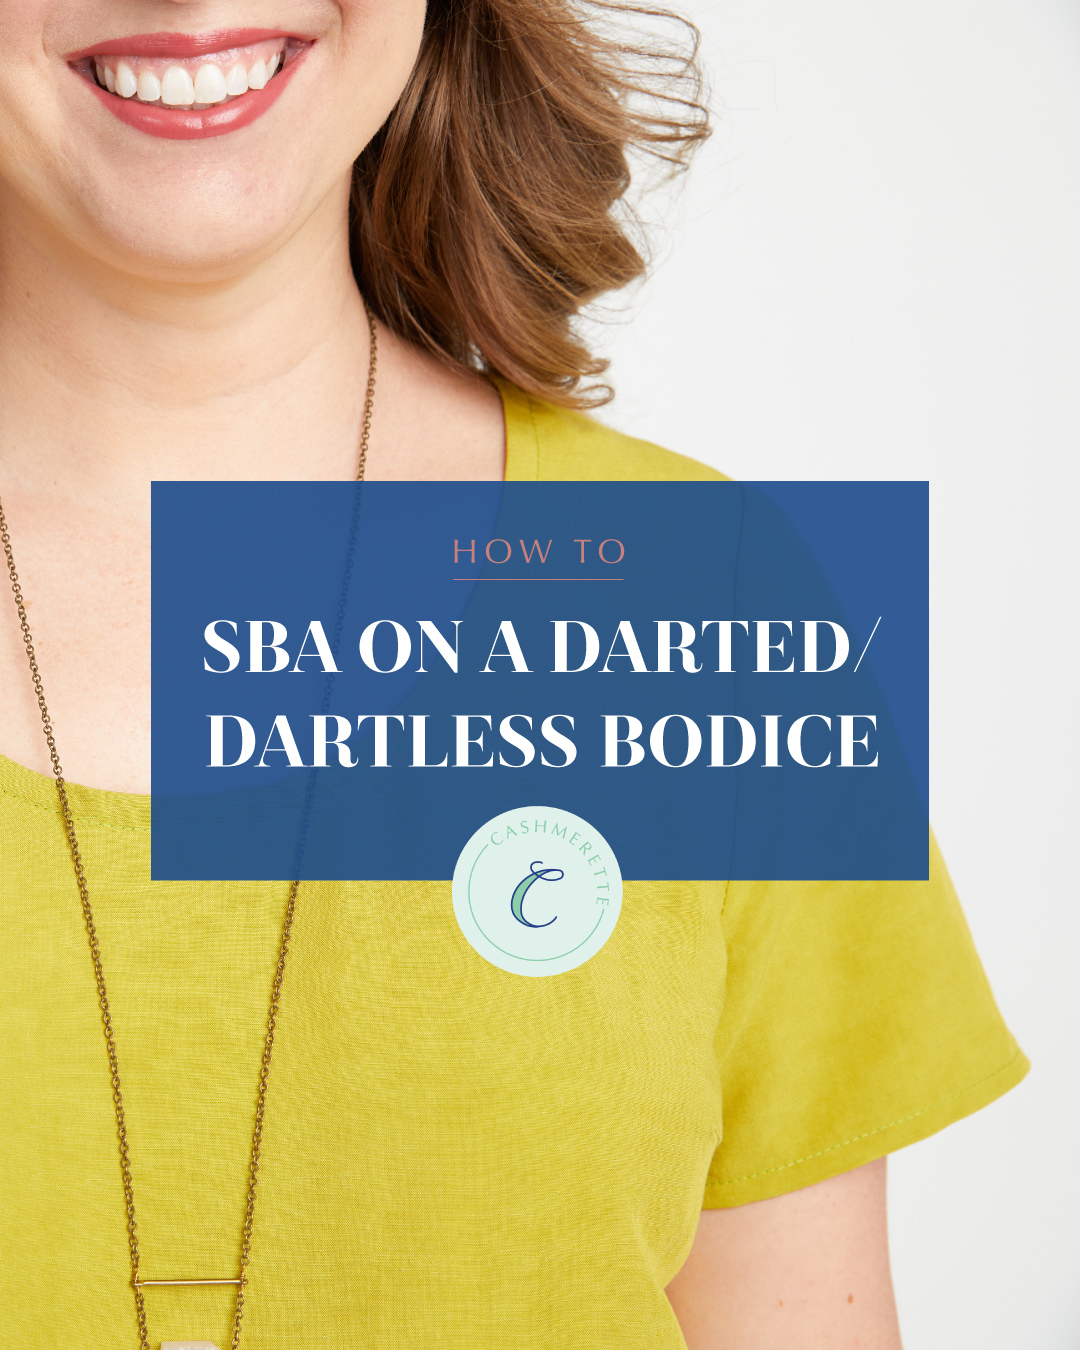 how to do an sba on a darted or dartless bodice